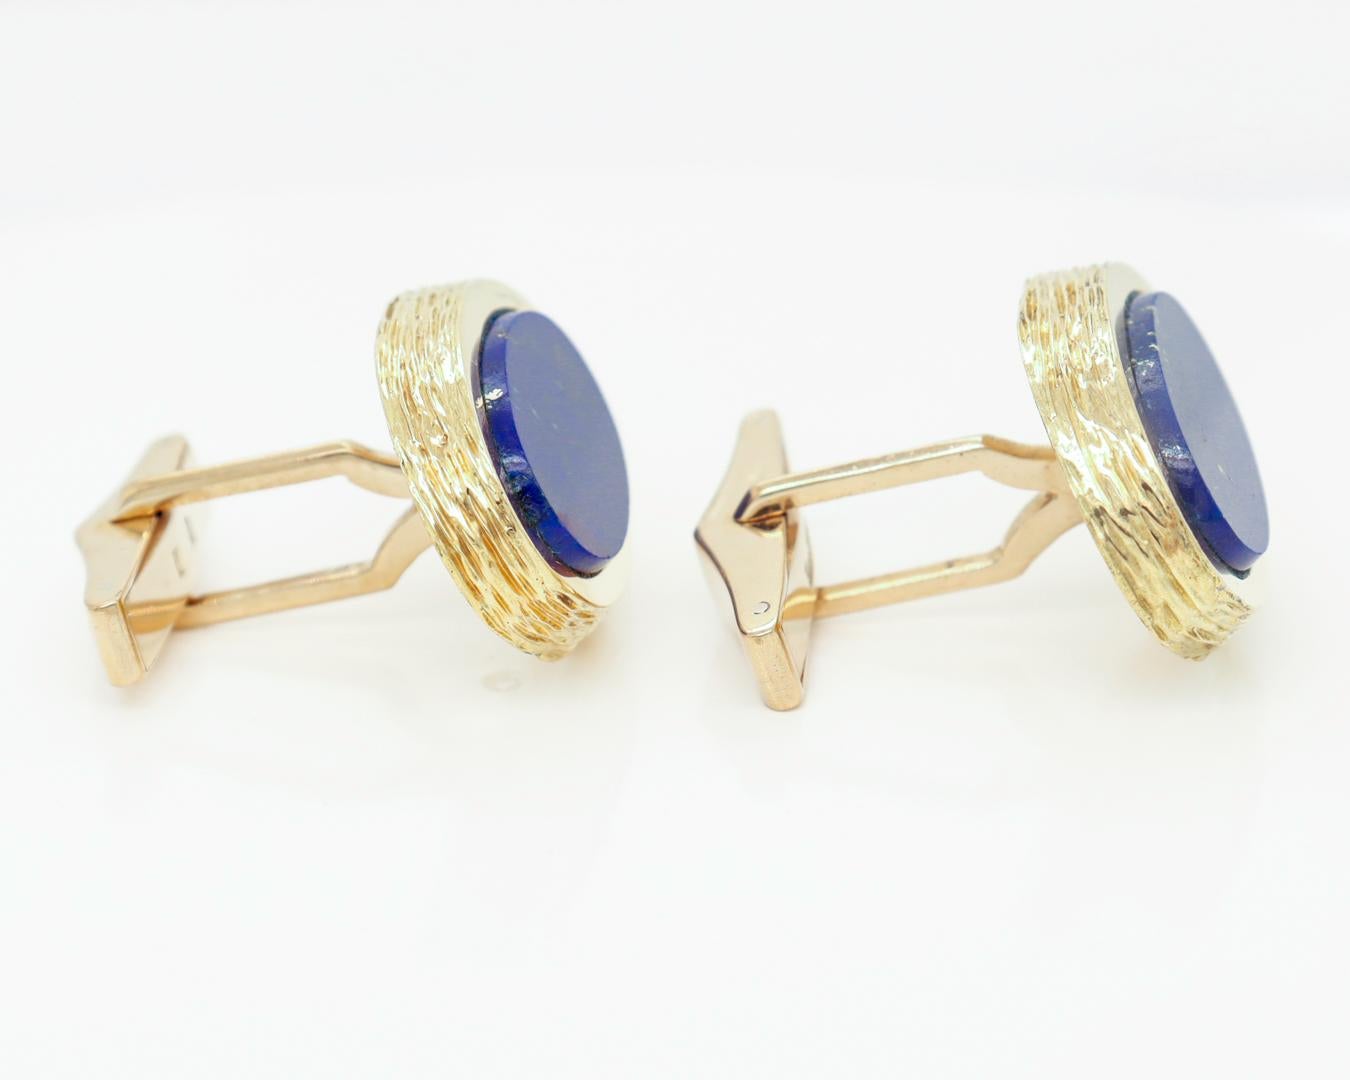 Pair of English Mid-Century Modern 18k Gold & Lapis Cufflinks by Kutchinsky In Good Condition For Sale In Philadelphia, PA